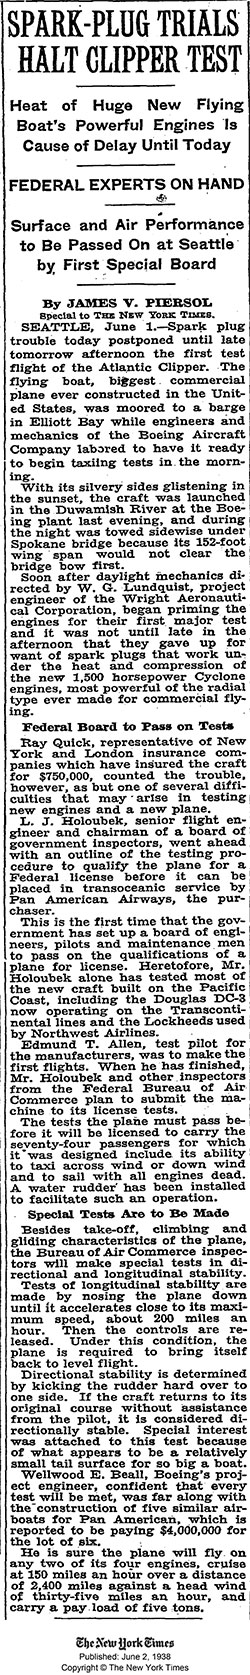 The New York Times, June 2, 1938 (Source: NYT)